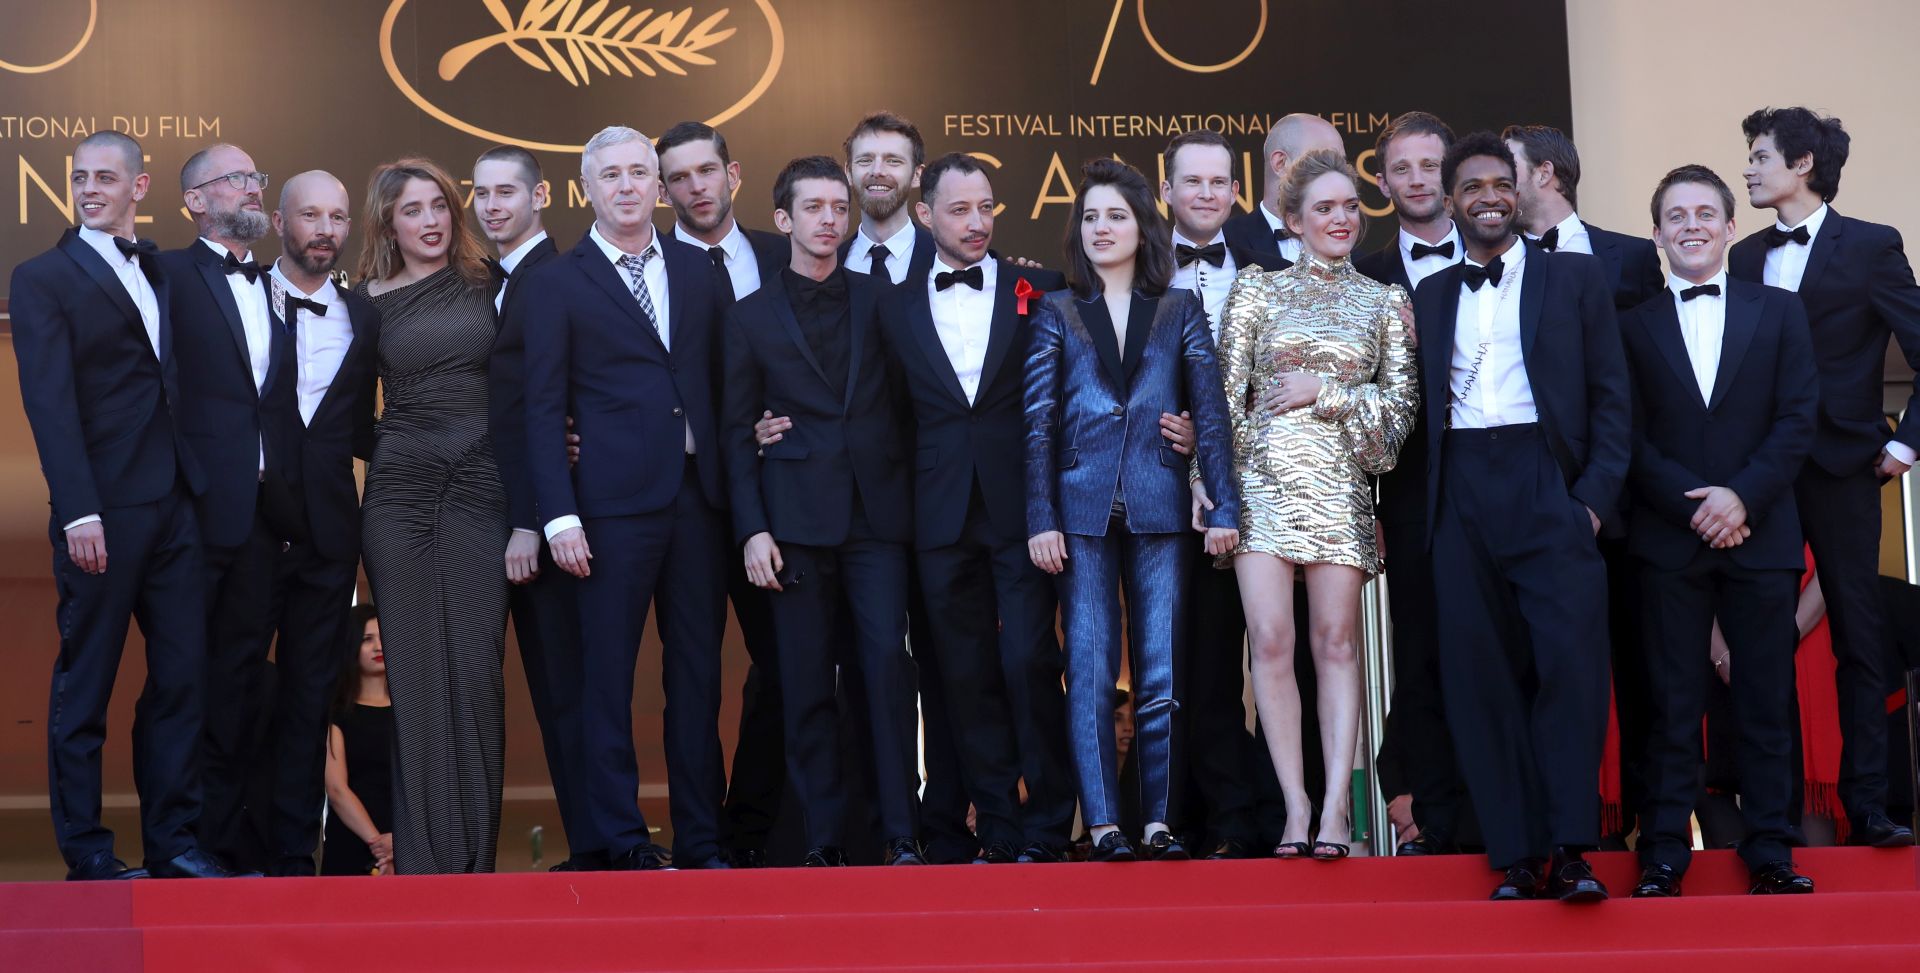 CANNES, FRANCE - MAY 20:  Actor Mehdi Rahim-Silvioli, Act-Up co-founder Didier Lestrade, actor Jean-Francois Auguste,  actress Adele Haenel, actor Ariel Borenstein, director Robin Campillo, actor Arnaud Valois, actor Nahuel Perez Biscayart, actor Antoine Reinartz, actor Julien Herbin, actress Aloise Sauvage, actor Simon Bourgade, actress Coralie Russier, actor Simon Guelat, actor Mehdi Toure, actor Felix Maritaud, actor Jerome Clement and actor Theophile Ray attend the "120 Beats Per Minute (120 Battements Par Minute)" screening during the 70th annual Cannes Film Festival at Palais des Festivals on May 20, 2017 in Cannes, France.  (Photo by Neilson Barnard/Getty Images)